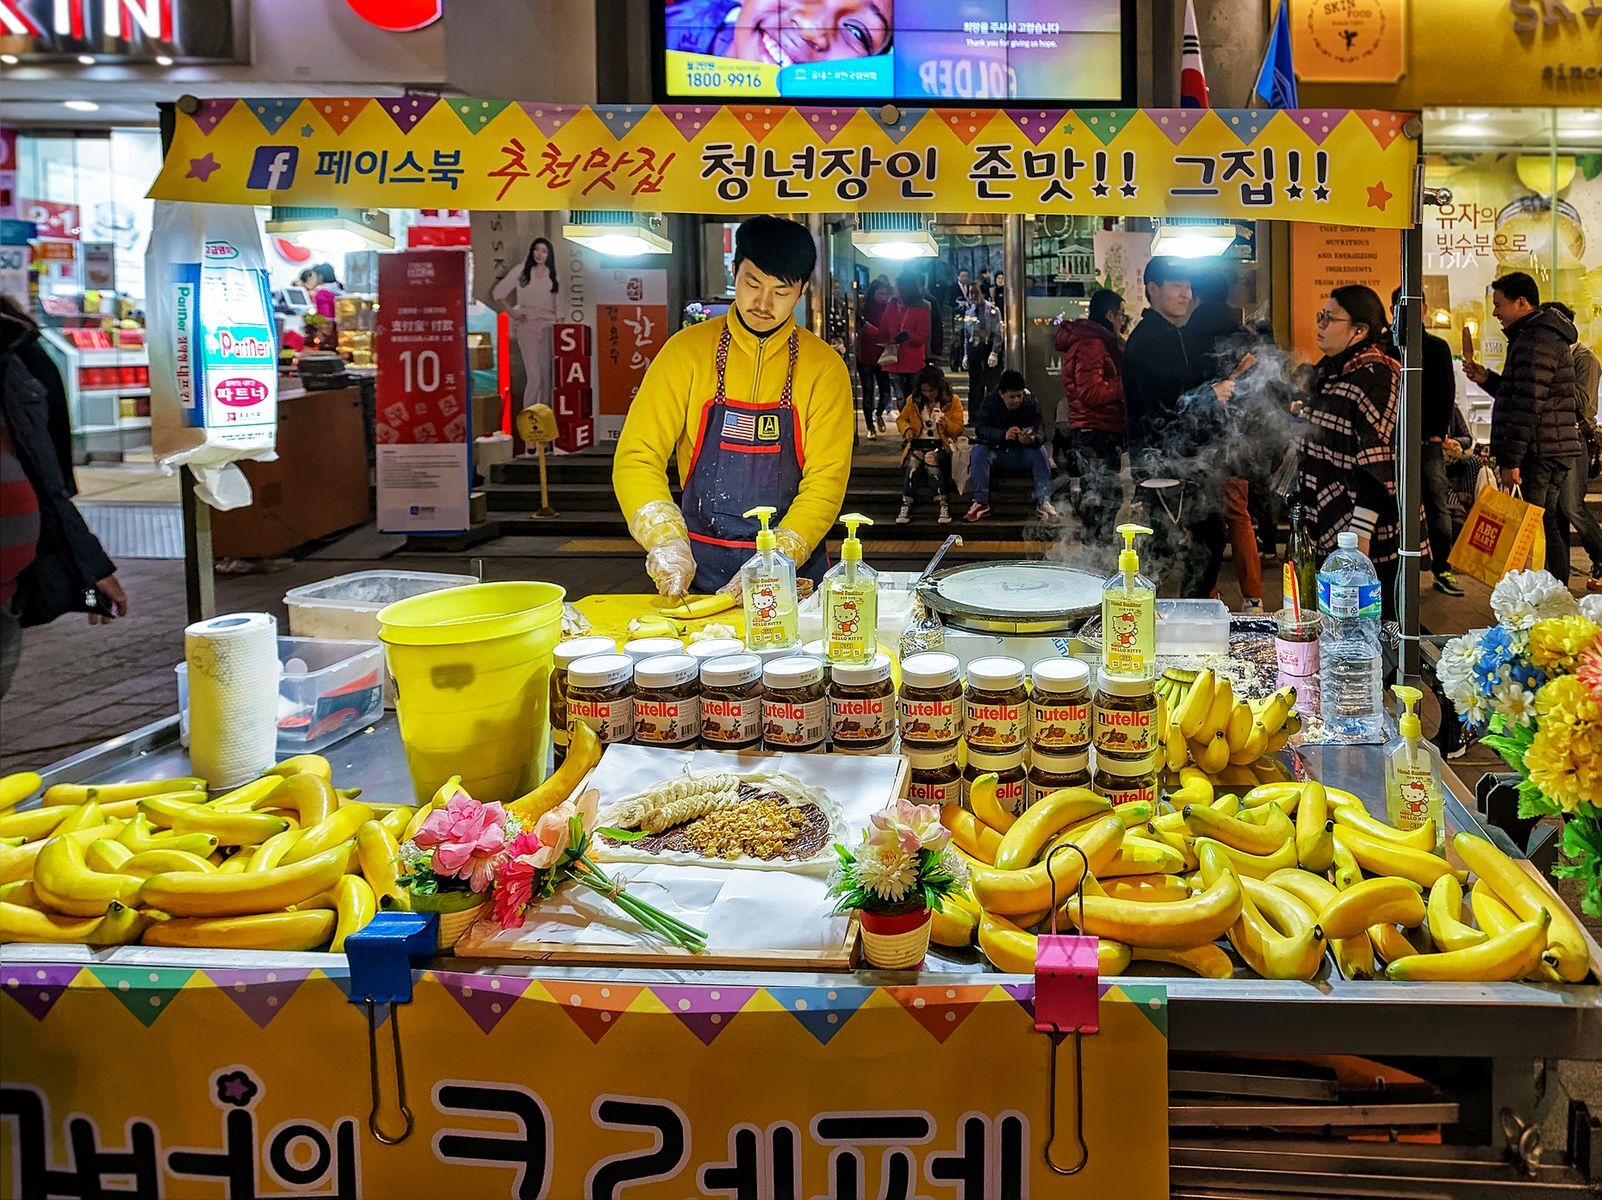 Monthly minimum: $538 Due to South Korea’s cold climate and limited agricultural production, <a href="https://expatguidekorea.com/article/why-are-these-things-so-expensive-in-korea.html" rel="noreferrer noopener">fruit is often much more expensive</a> there than in other places around the world. For example, according to Numbeo, it’s the most expensive country to buy <a href="https://www.numbeo.com/cost-of-living/country_price_rankings?itemId=118" rel="noreferrer noopener">bananas</a> and <a href="https://www.numbeo.com/cost-of-living/country_price_rankings?itemId=110" rel="noreferrer noopener">apples</a>.